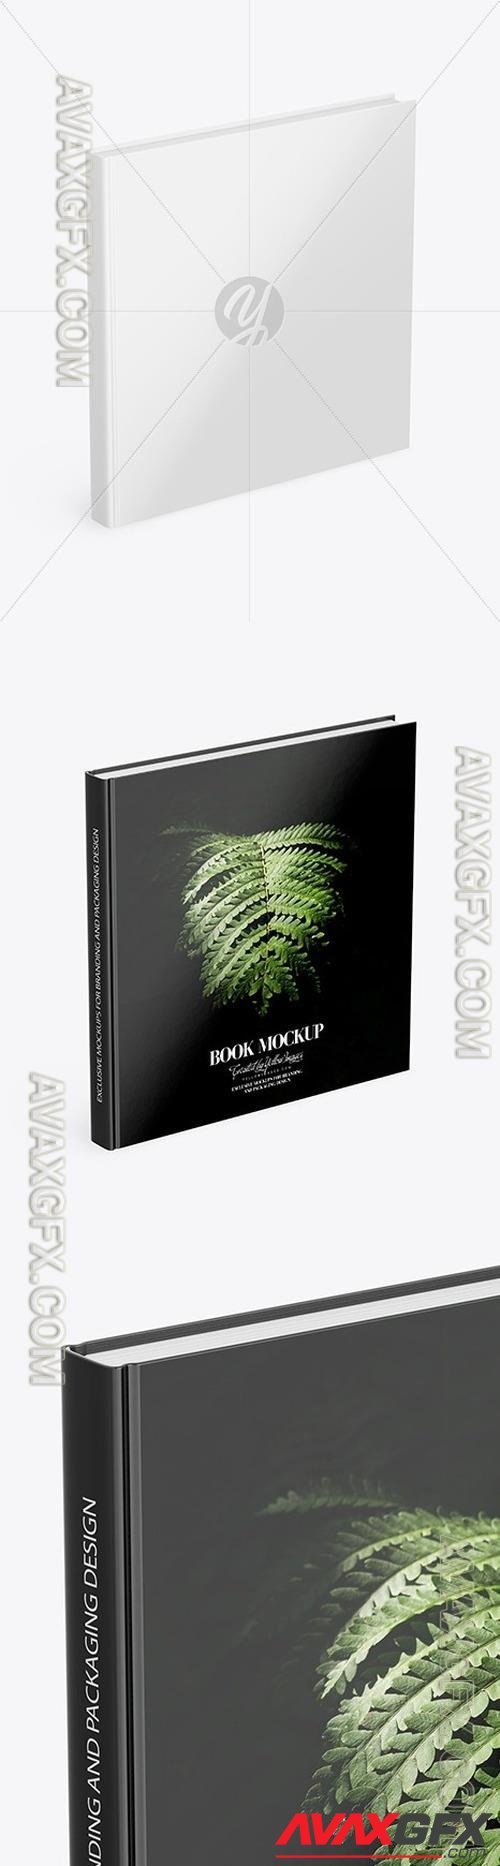 Book w/ Glossy Cover Mockup - High Angle View 48163 TIF